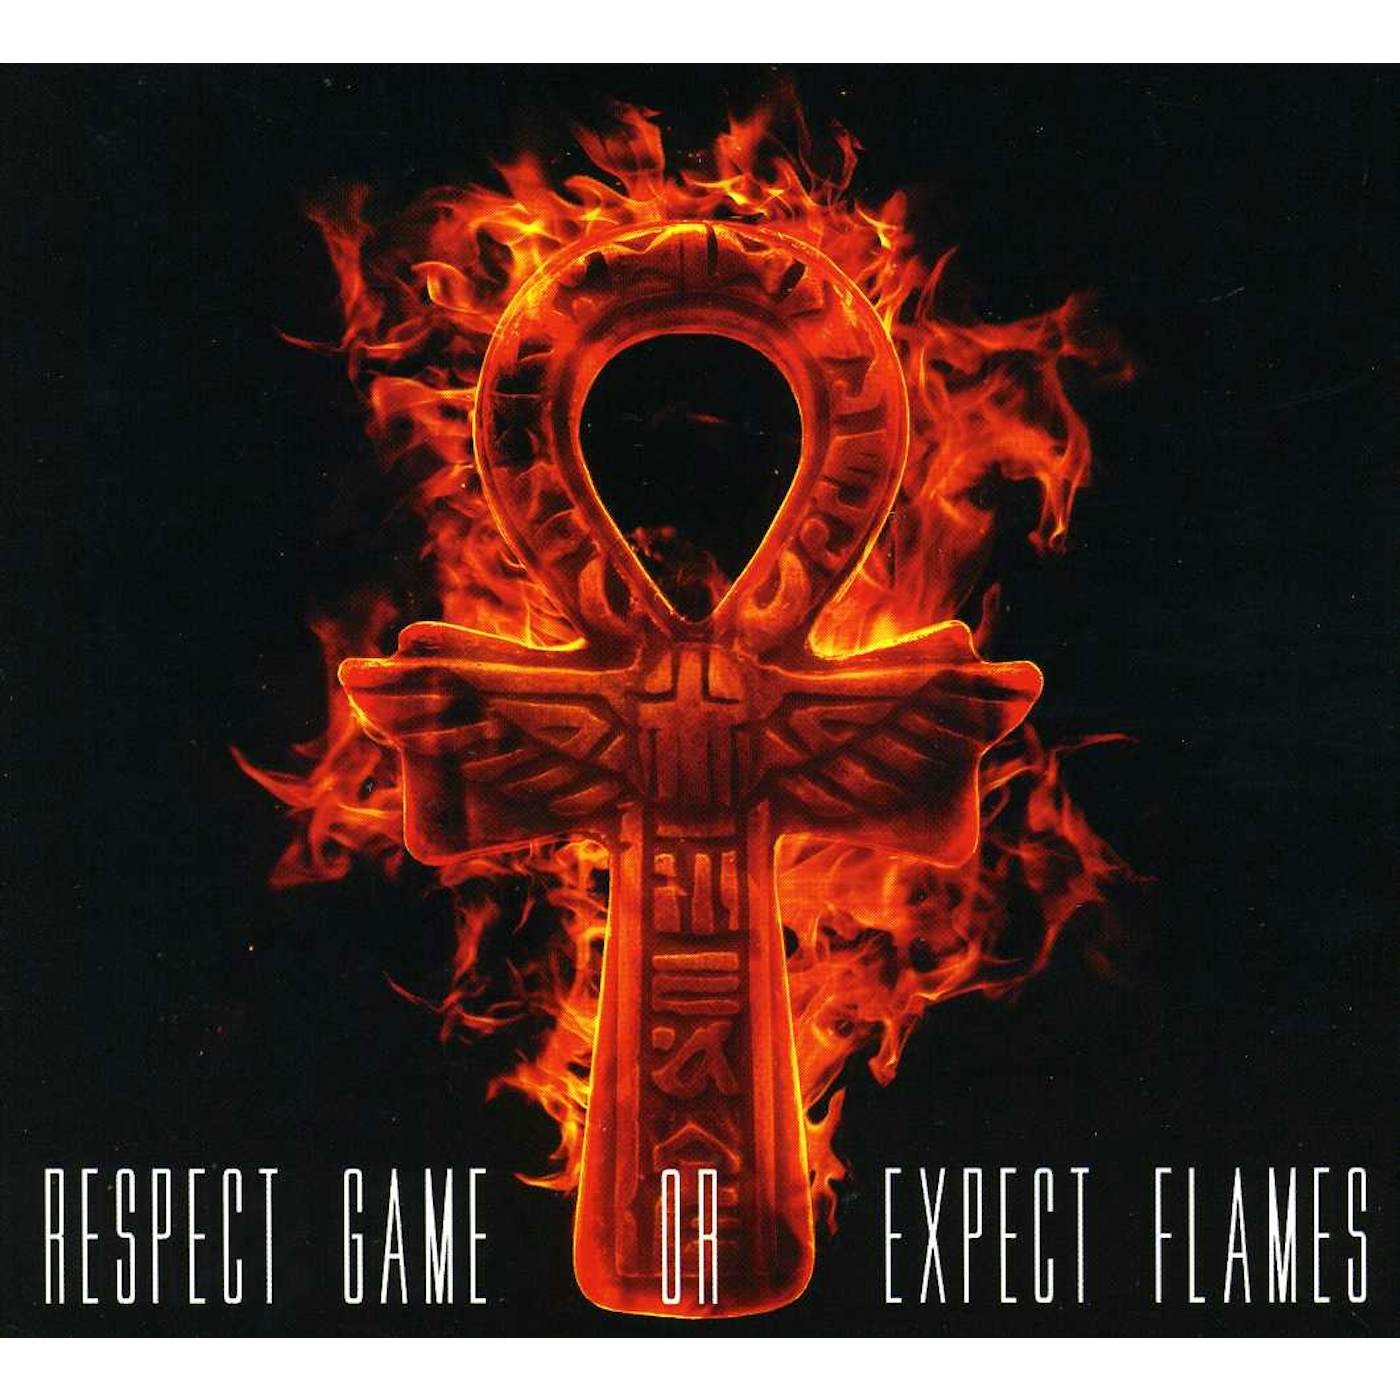 Casual RESPECT GAME OR EXPECT FLAMES CD